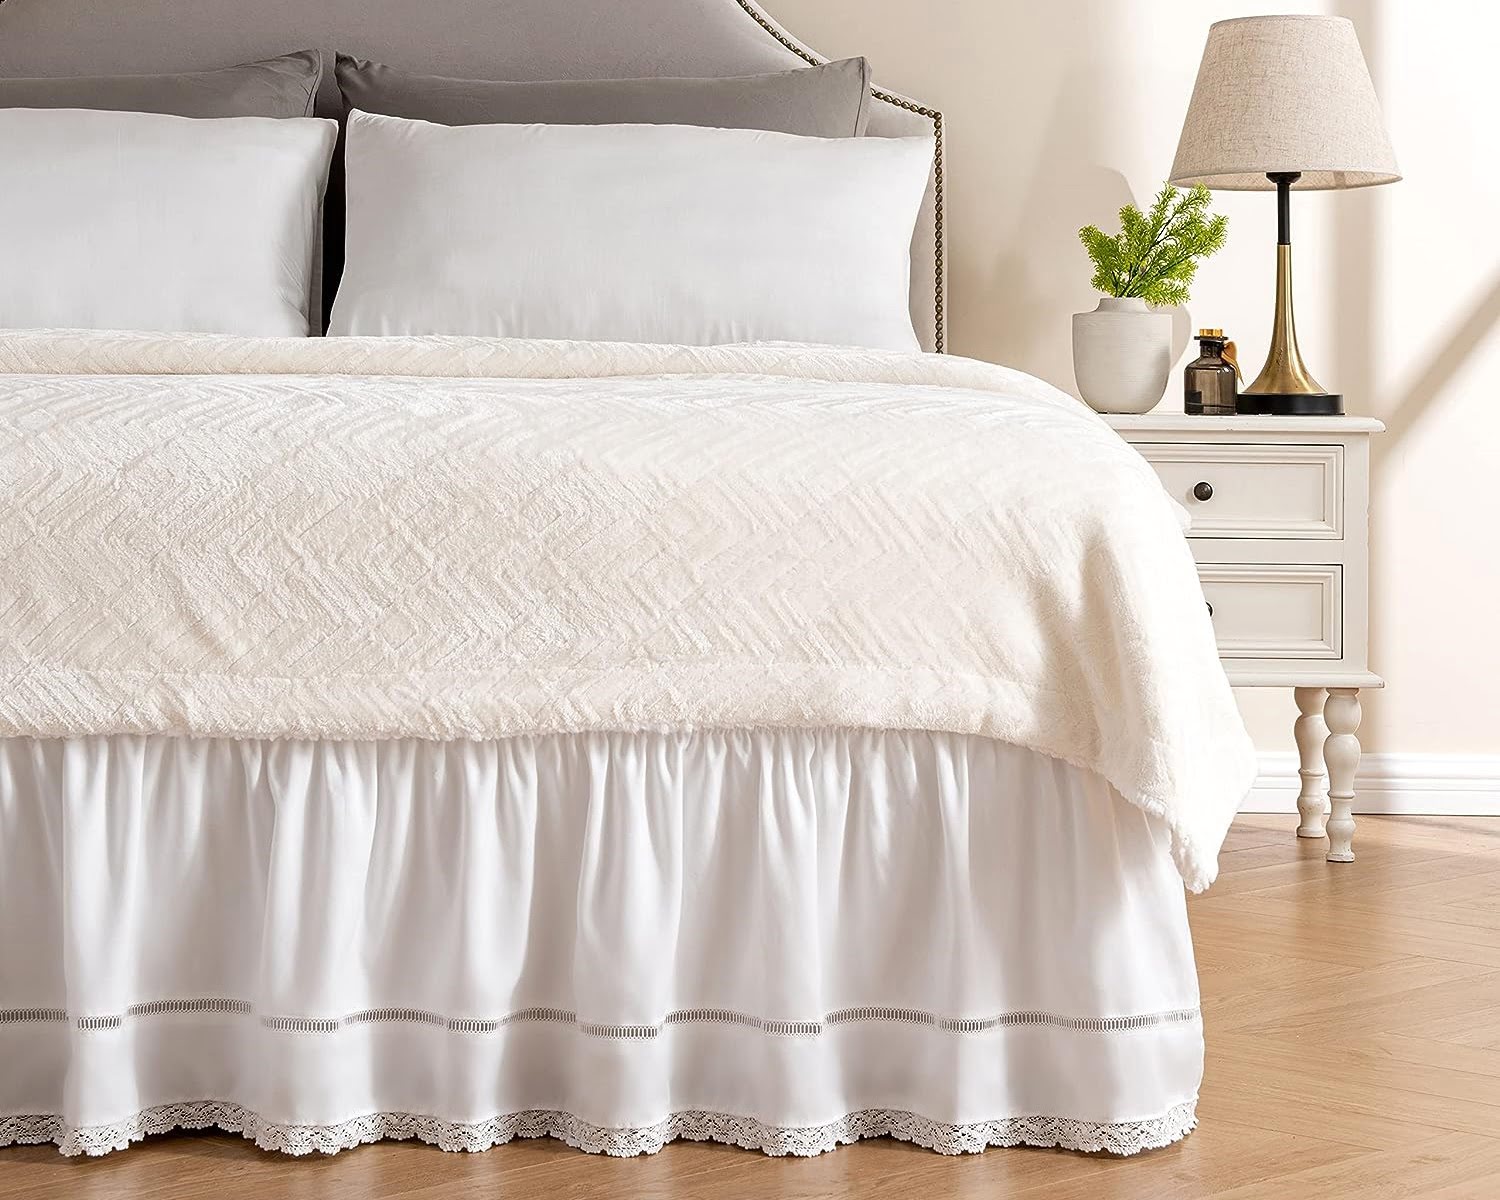 How To Keep A Bed Skirt In Place | Storables